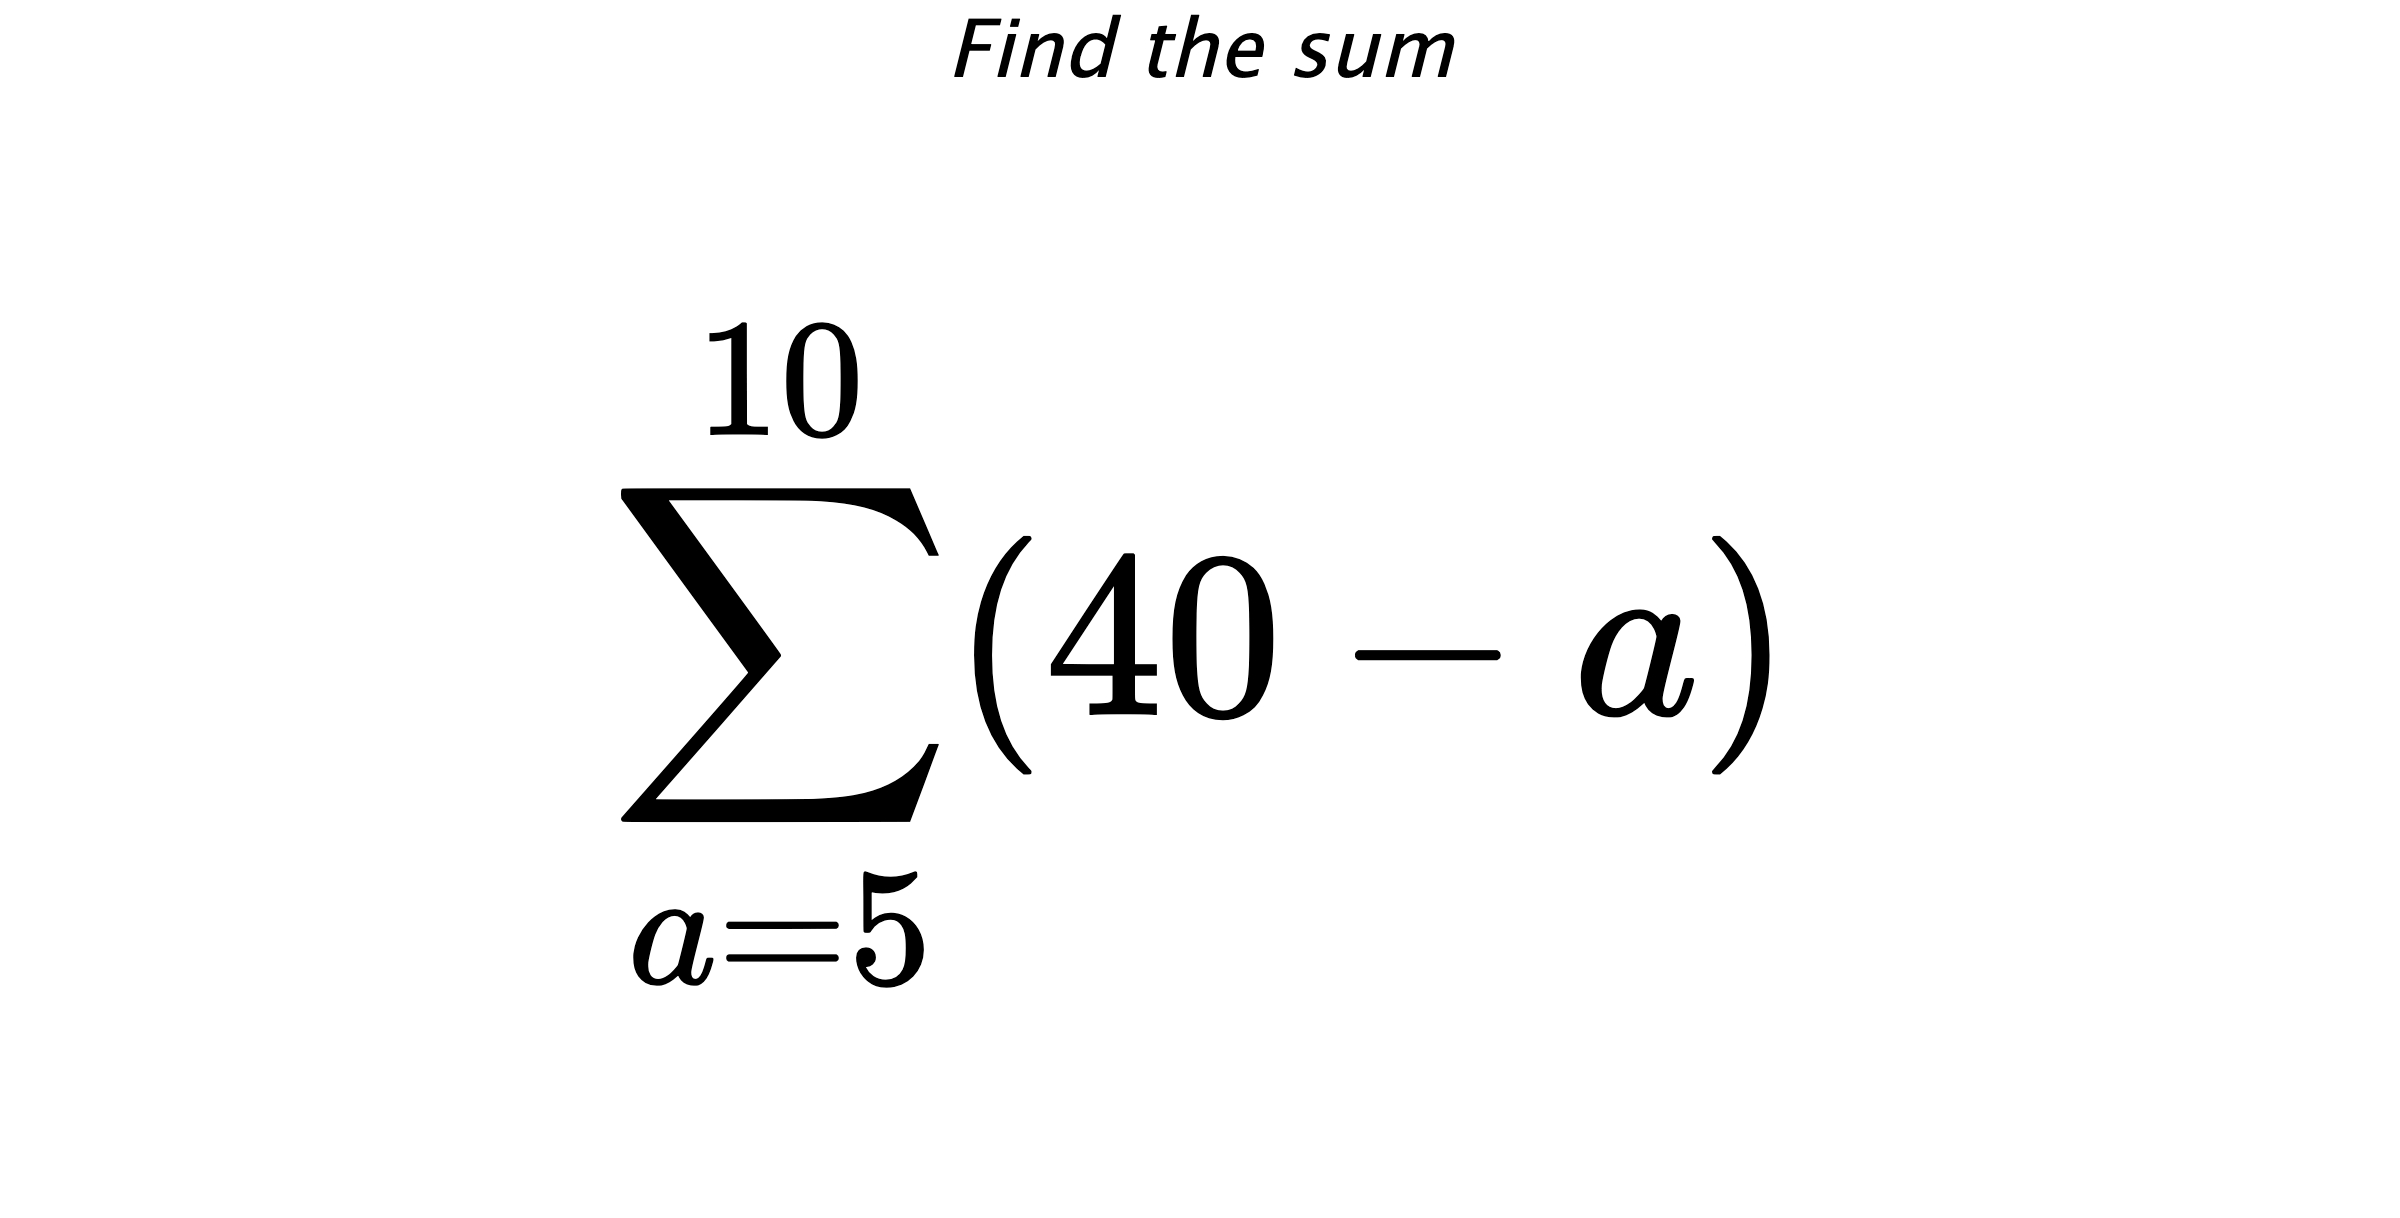 Find the sum $$ \sum_{a=5}^{10} (40-a)$$